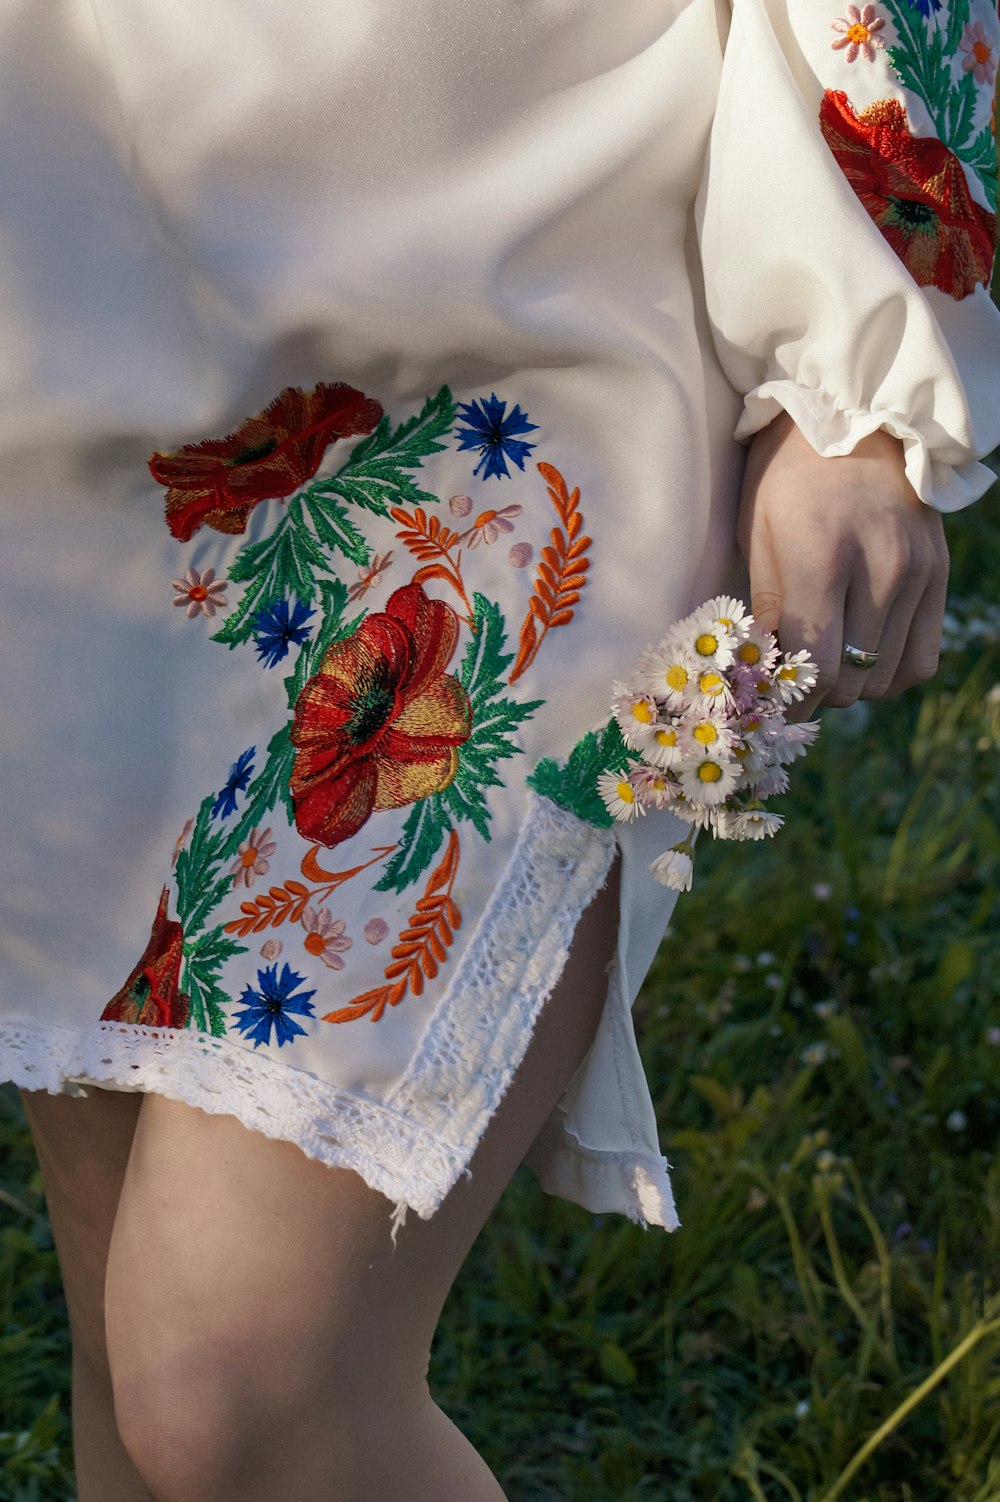 a person wearing a white dress with flowers on it